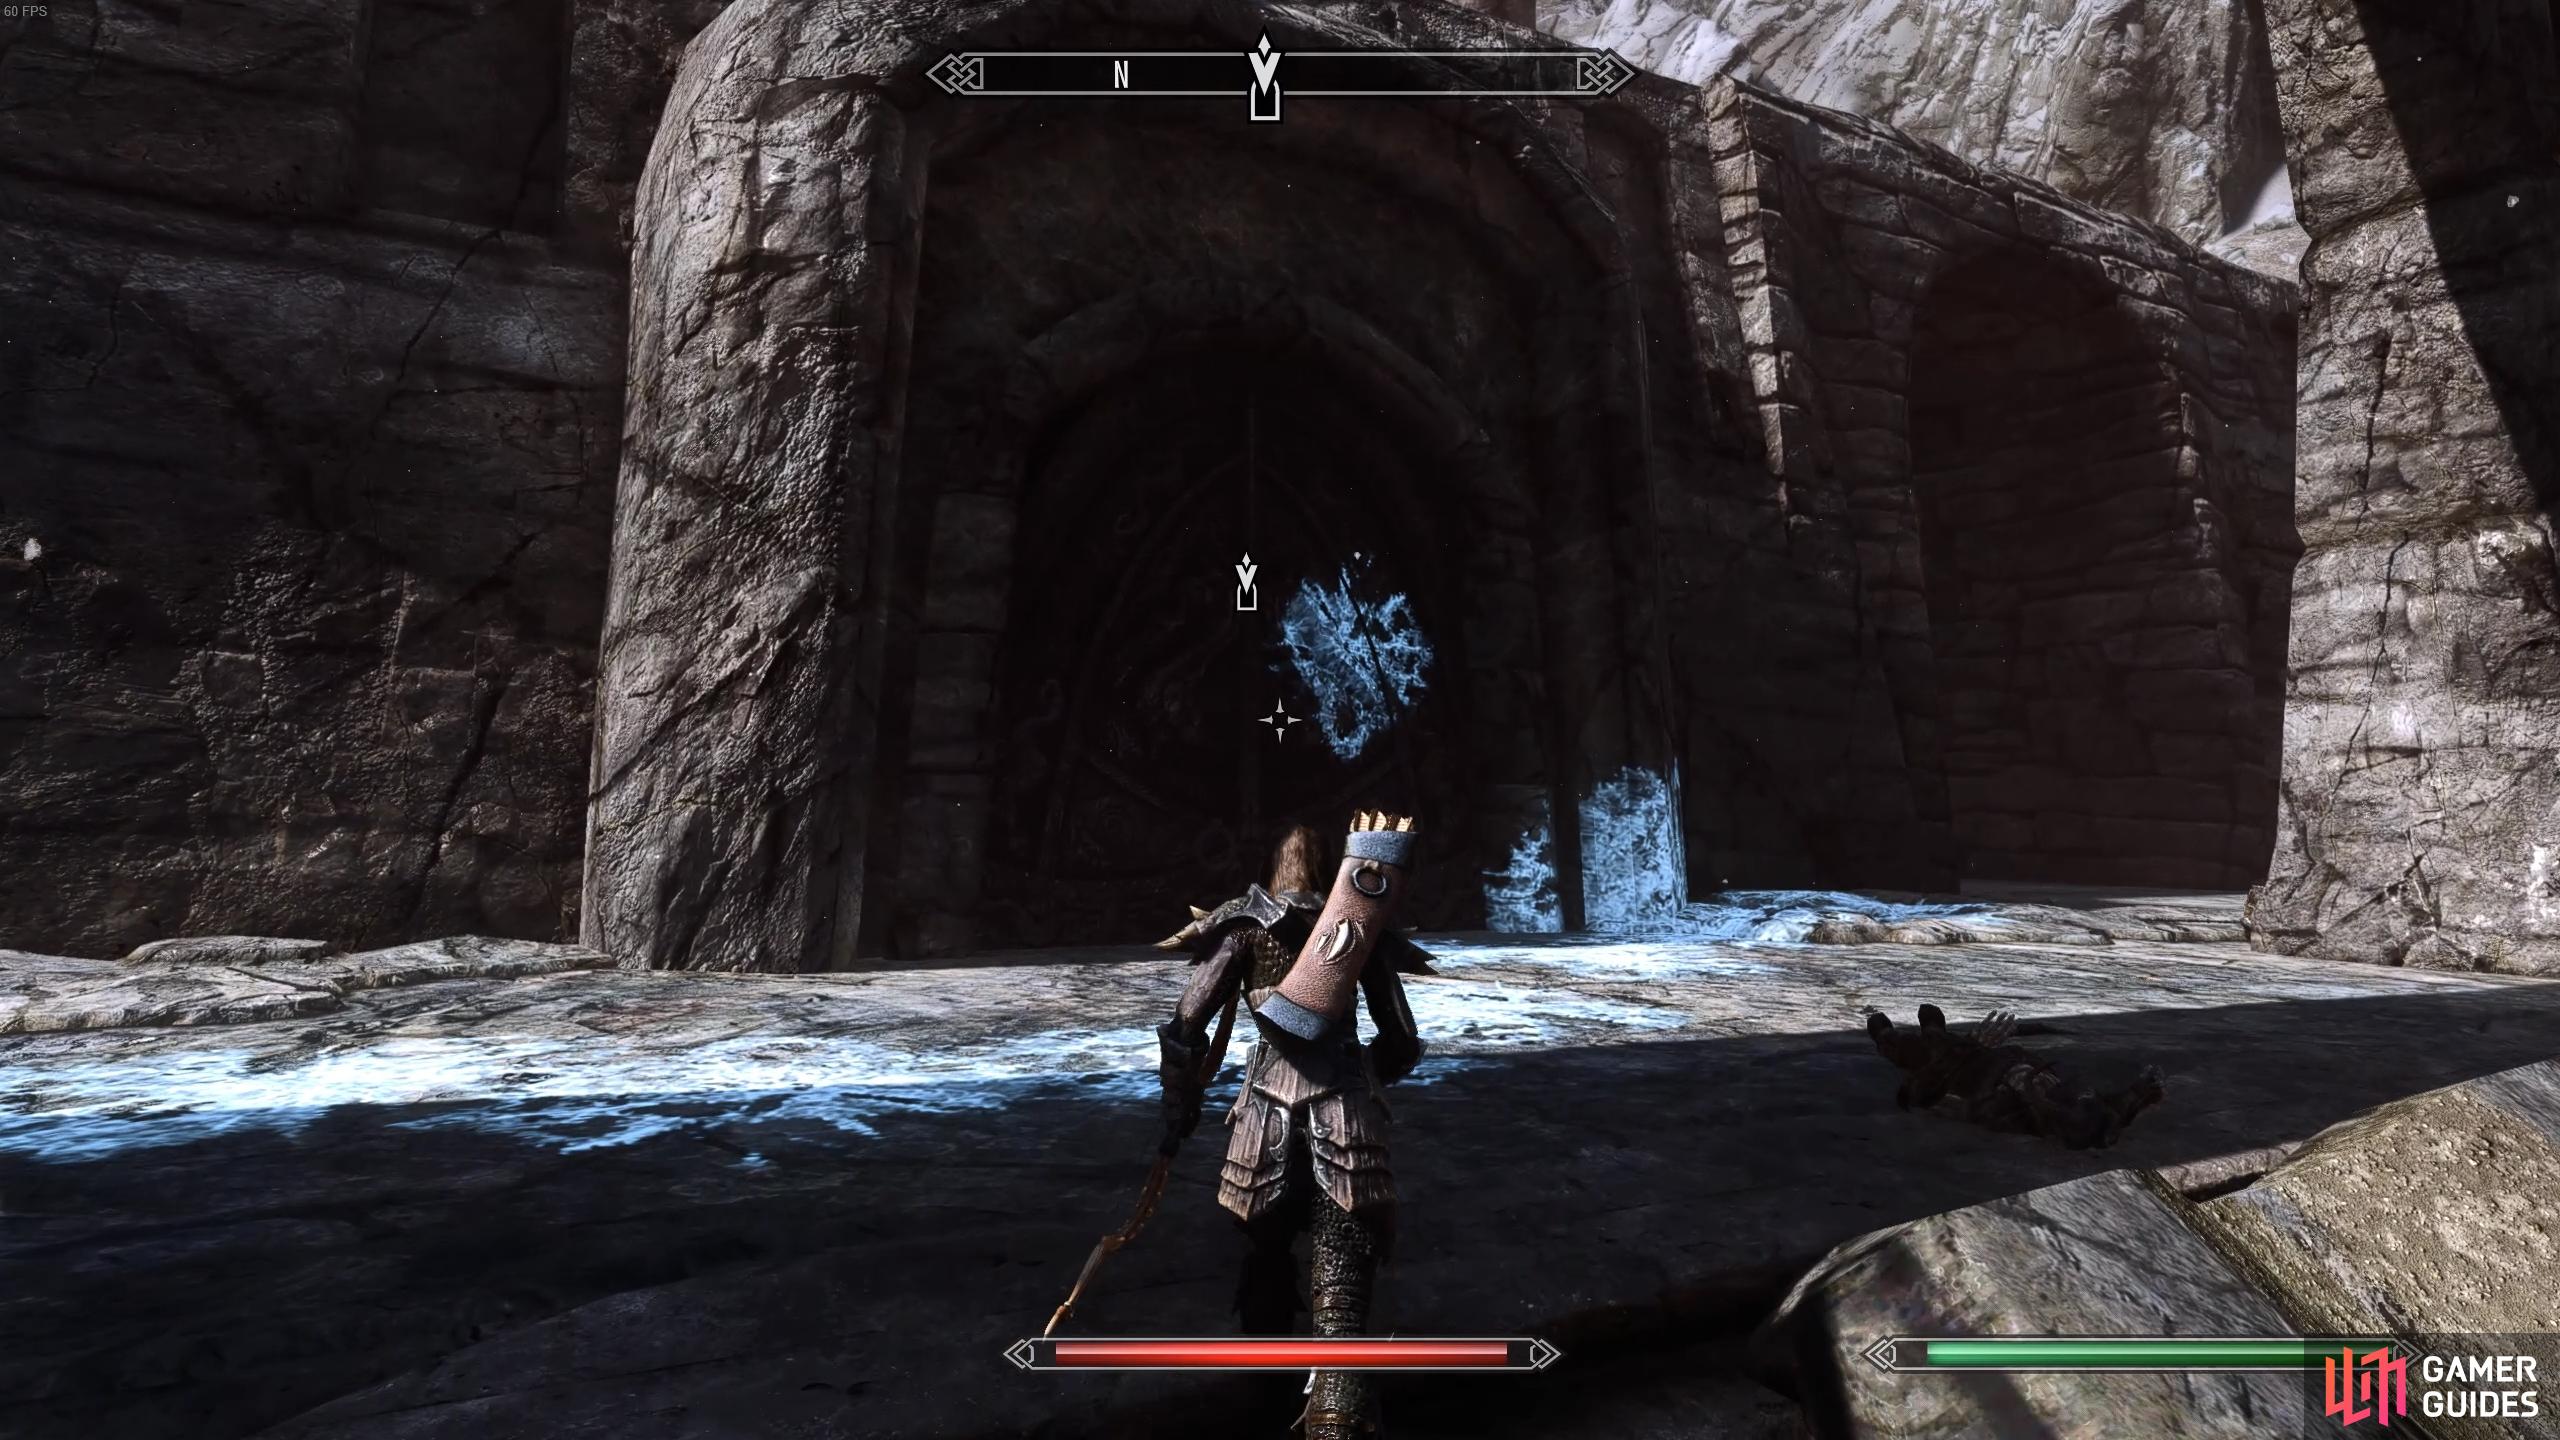 You can enter Skuldafn Temple after defeating the dragons and draugr in the courtyard.